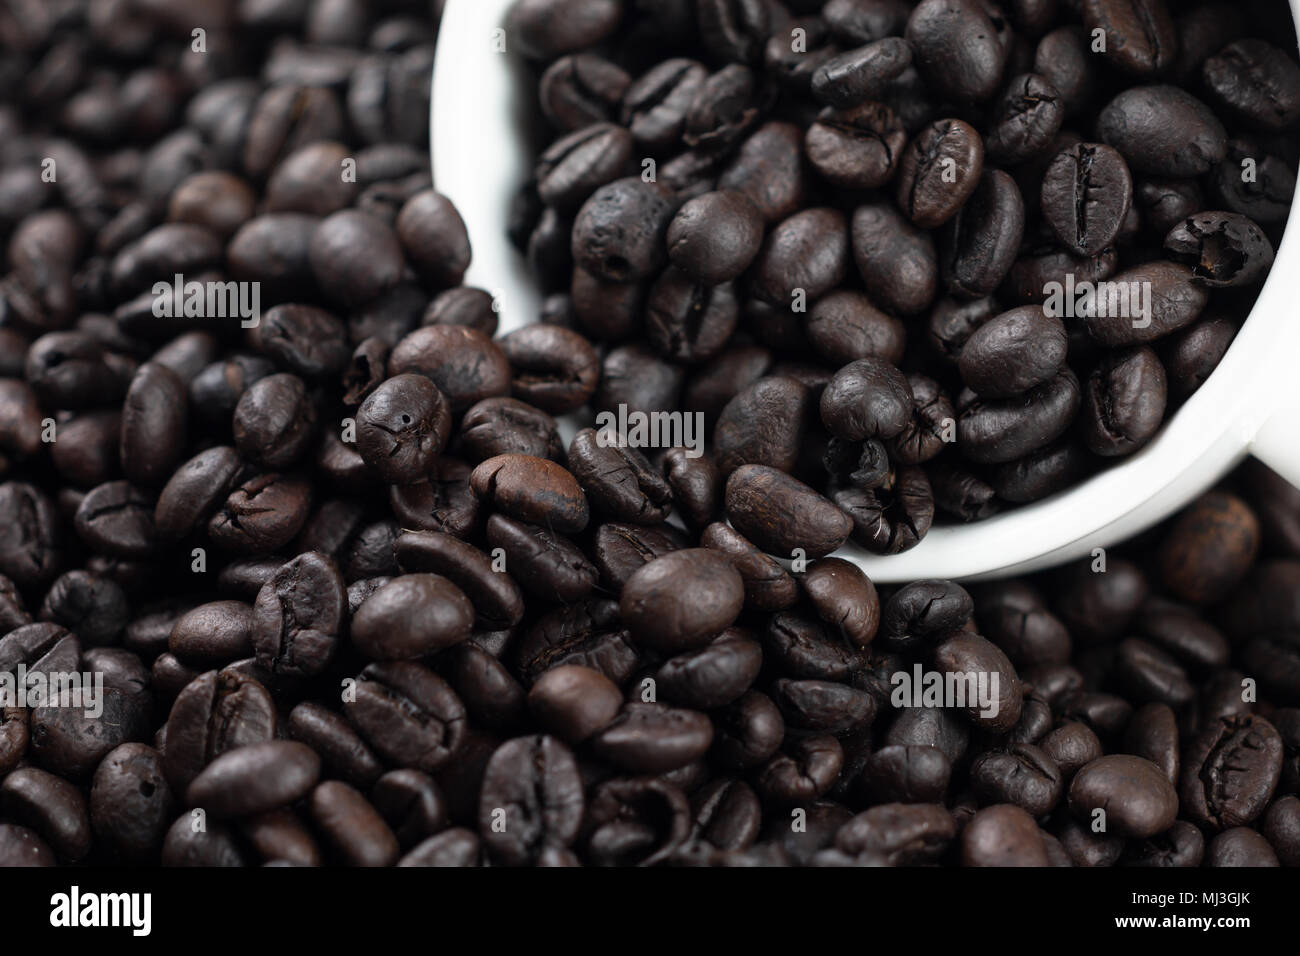 Roasted coffee beans in white glass. Placed on the coffee background and texture. Select focus shallow depth of field. Blurred background Stock Photo